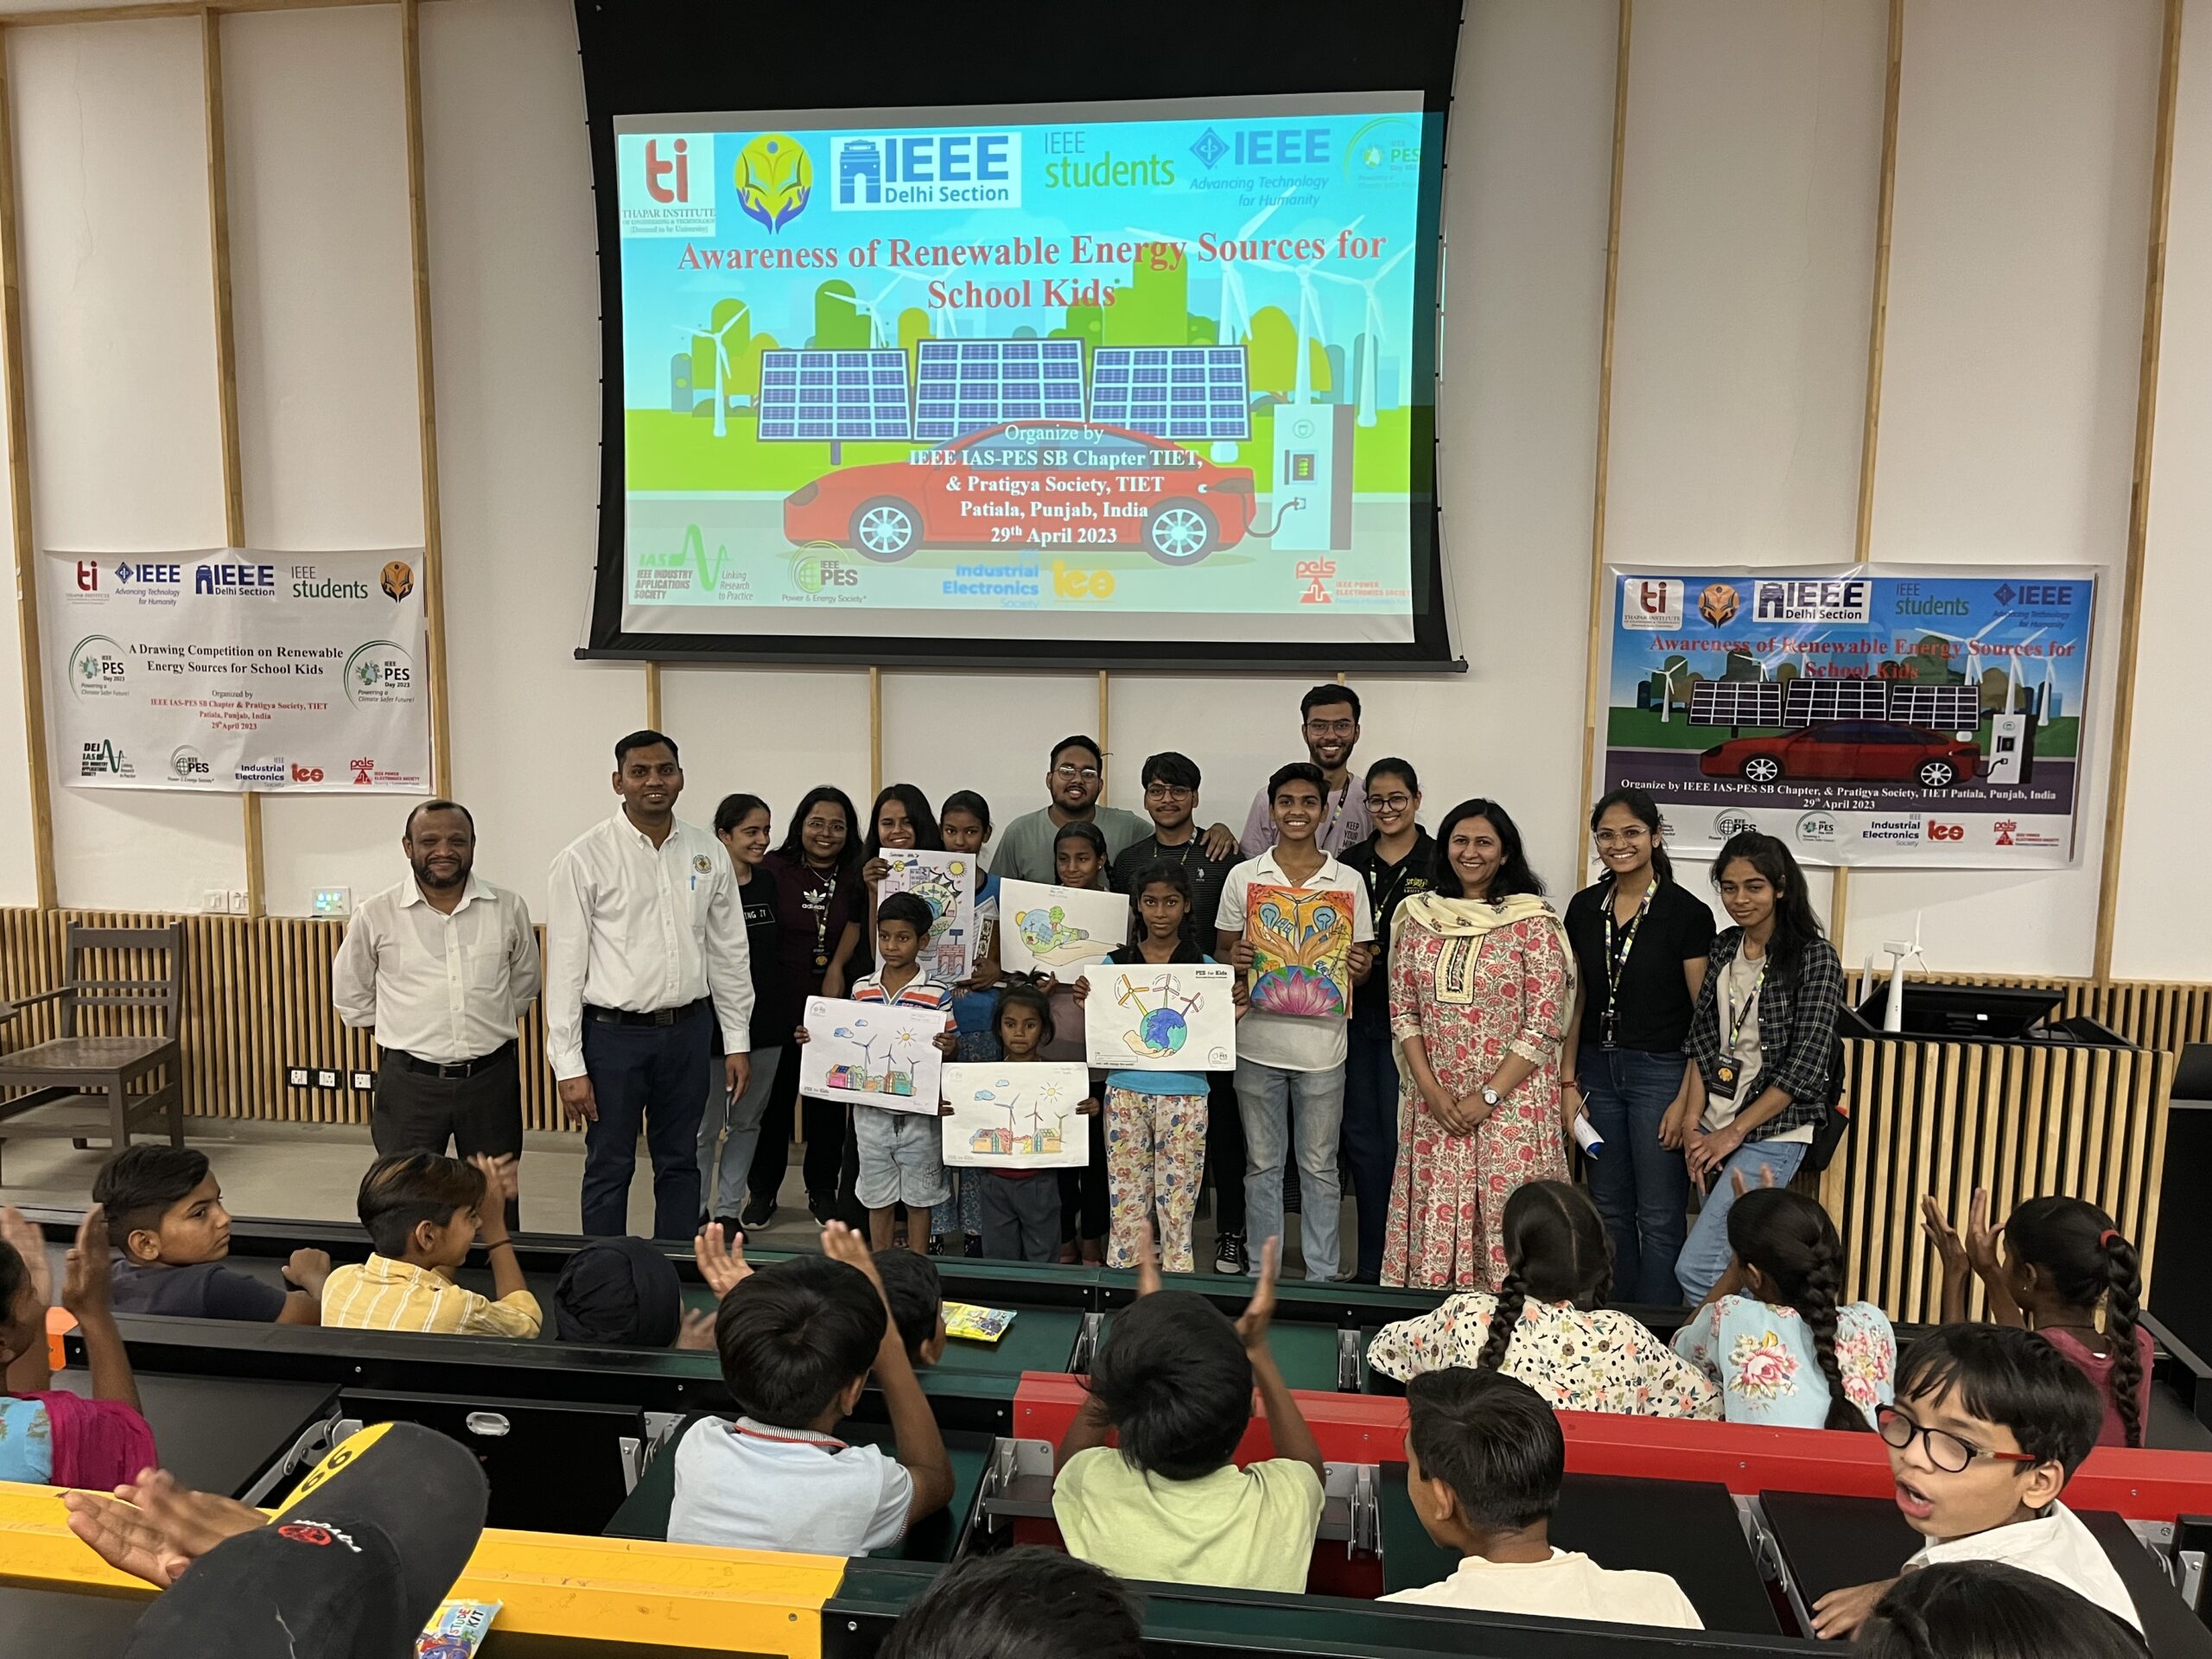 Awareness of Renewable Energy Sources for School Kids - IEEE Thapar Institute of Engineering and Technology, Patiala, Punjab, India